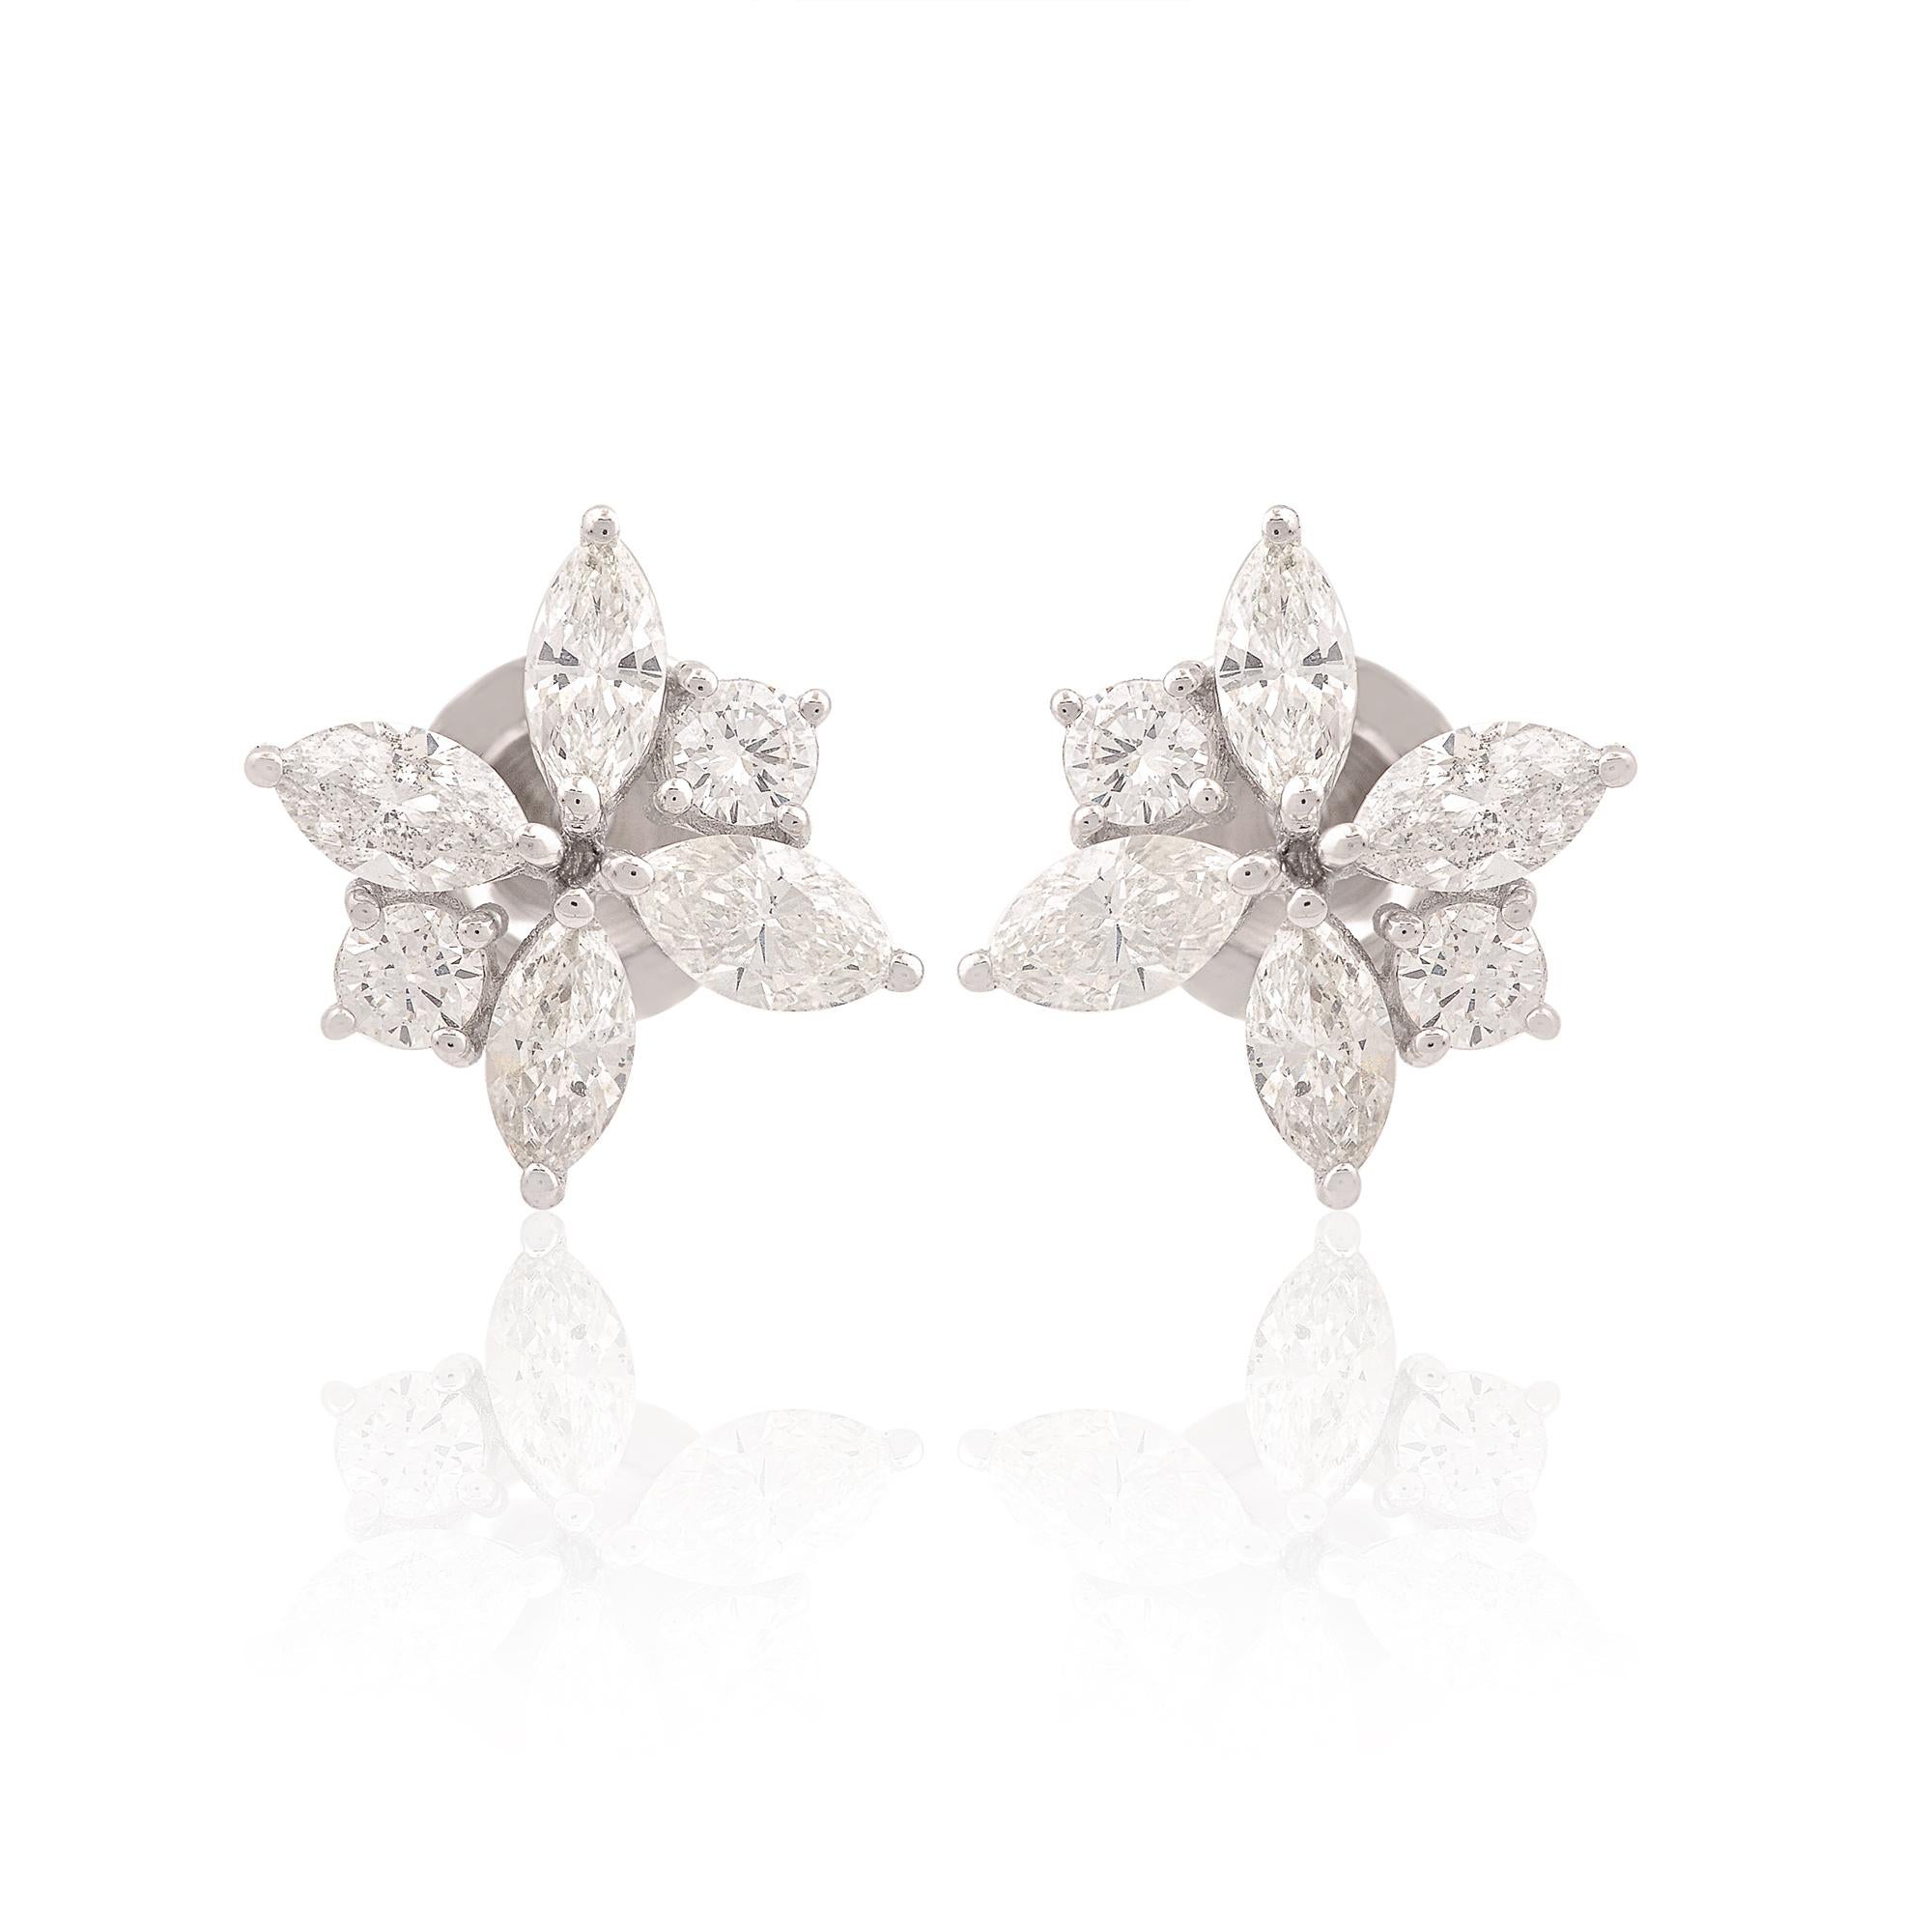 Indulge in the timeless elegance of these exquisite diamond stud earrings, each boasting a combination of marquise and round-cut diamonds set in luxurious 18 karat white gold. Crafted with meticulous attention to detail, these earrings exude